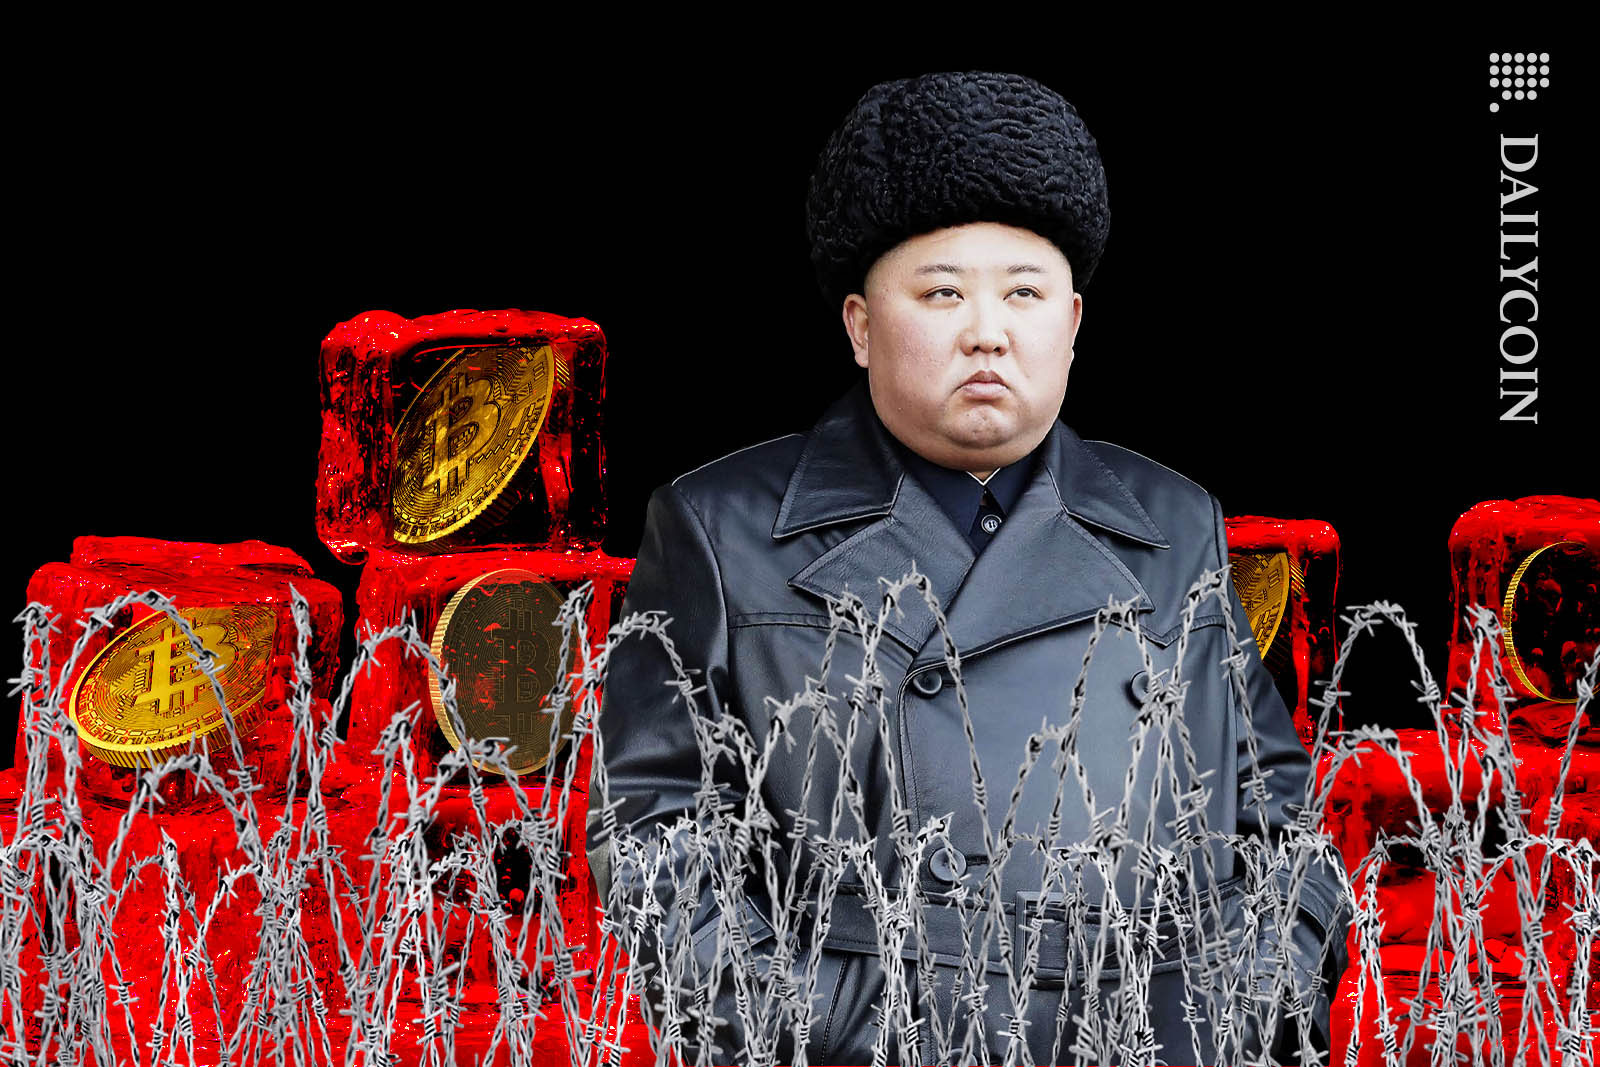 Kim Jong Un appeares to be slightly irritated looking over the fence to South Korea with some frozen coins behind him.